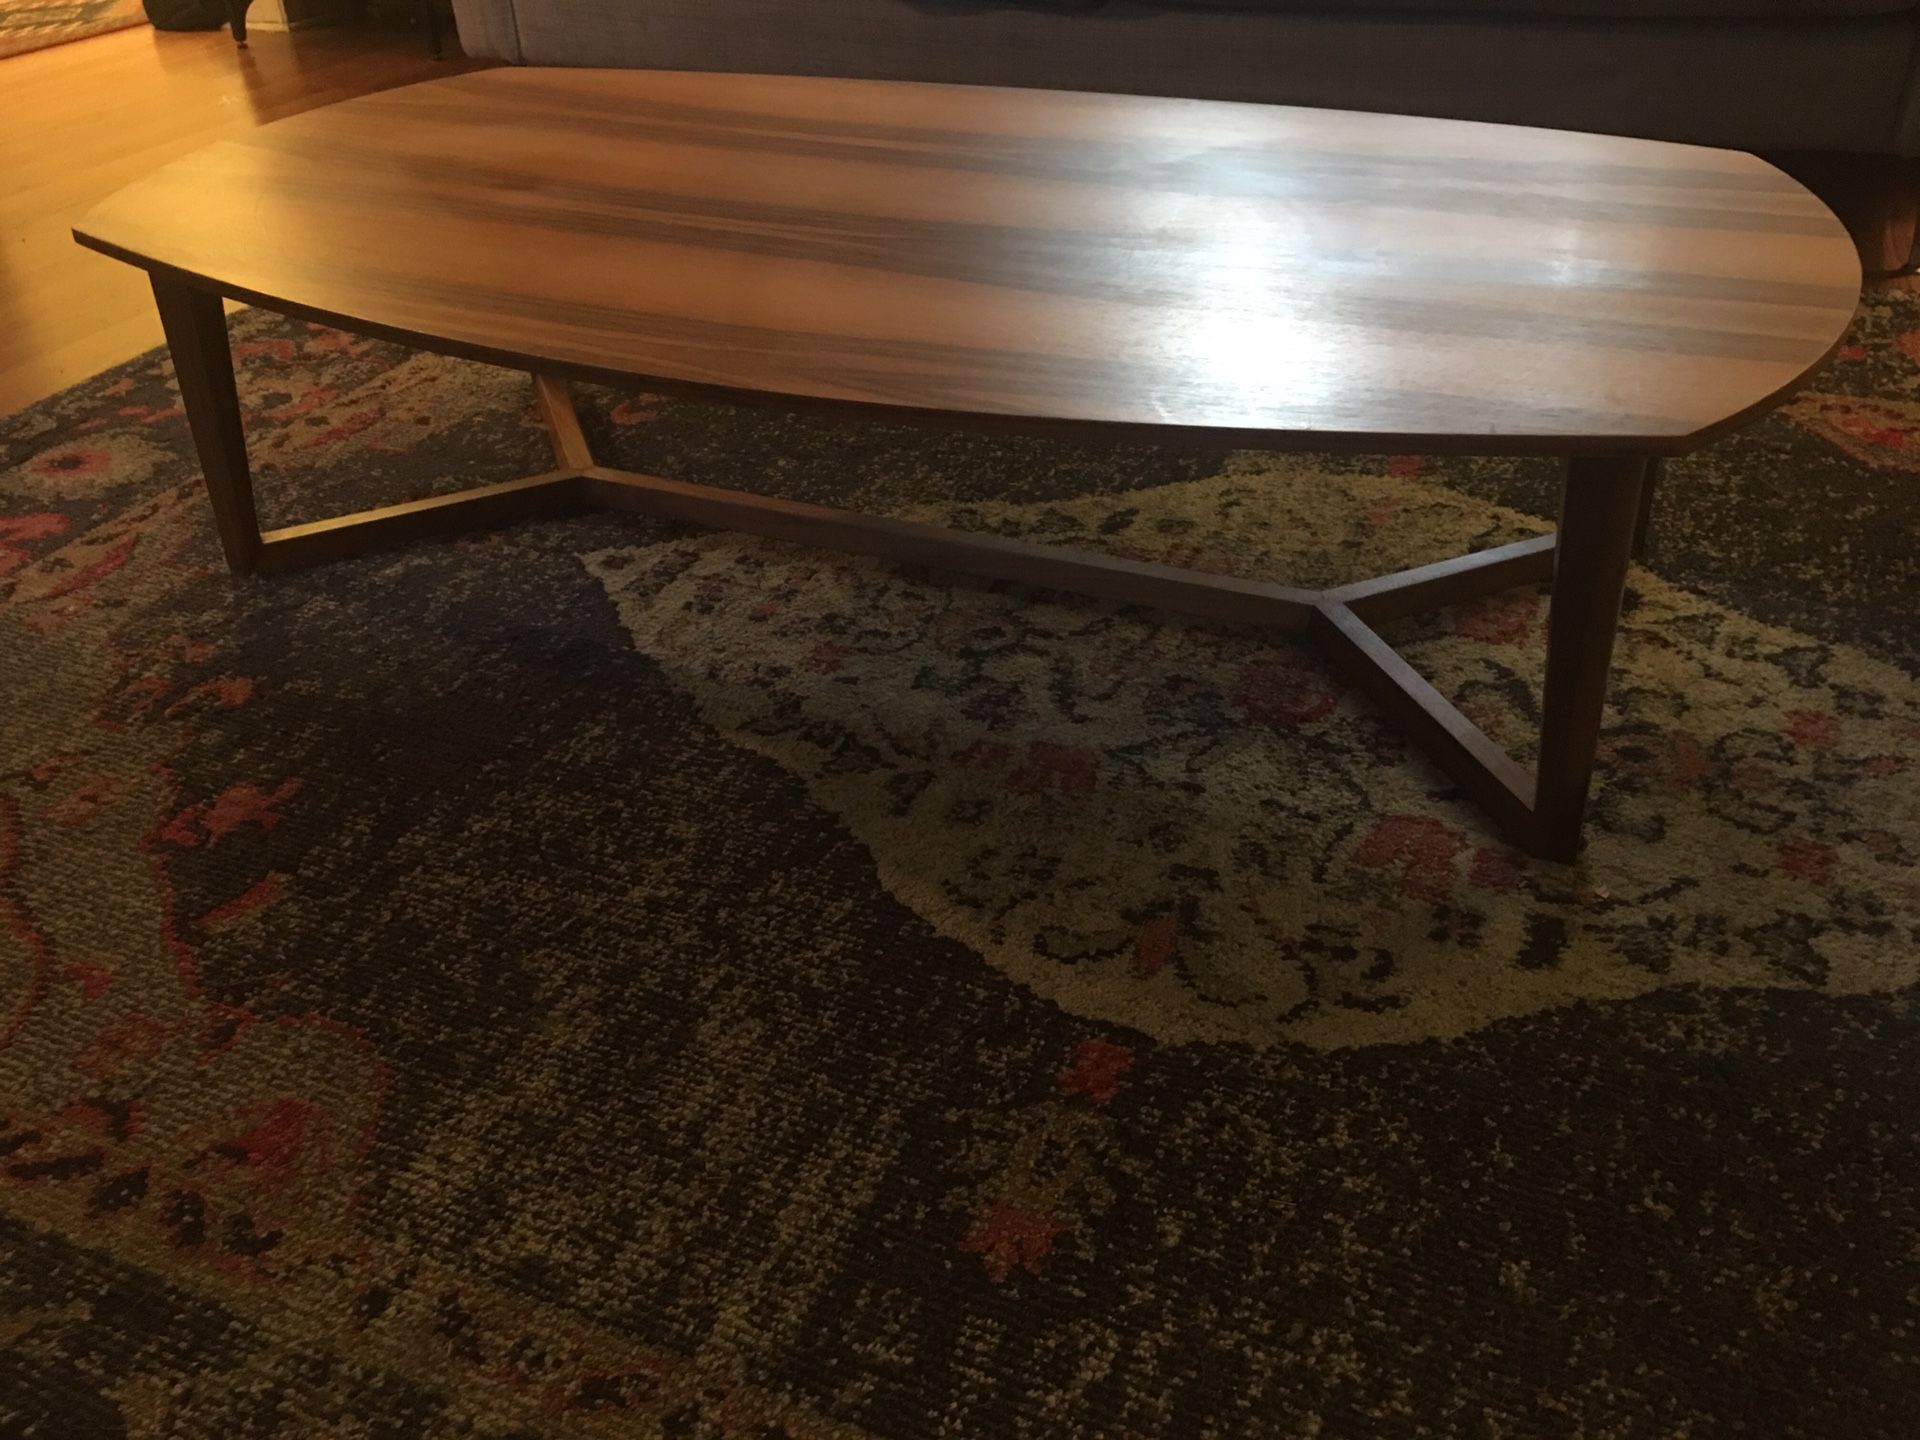 MCM low profile coffee table